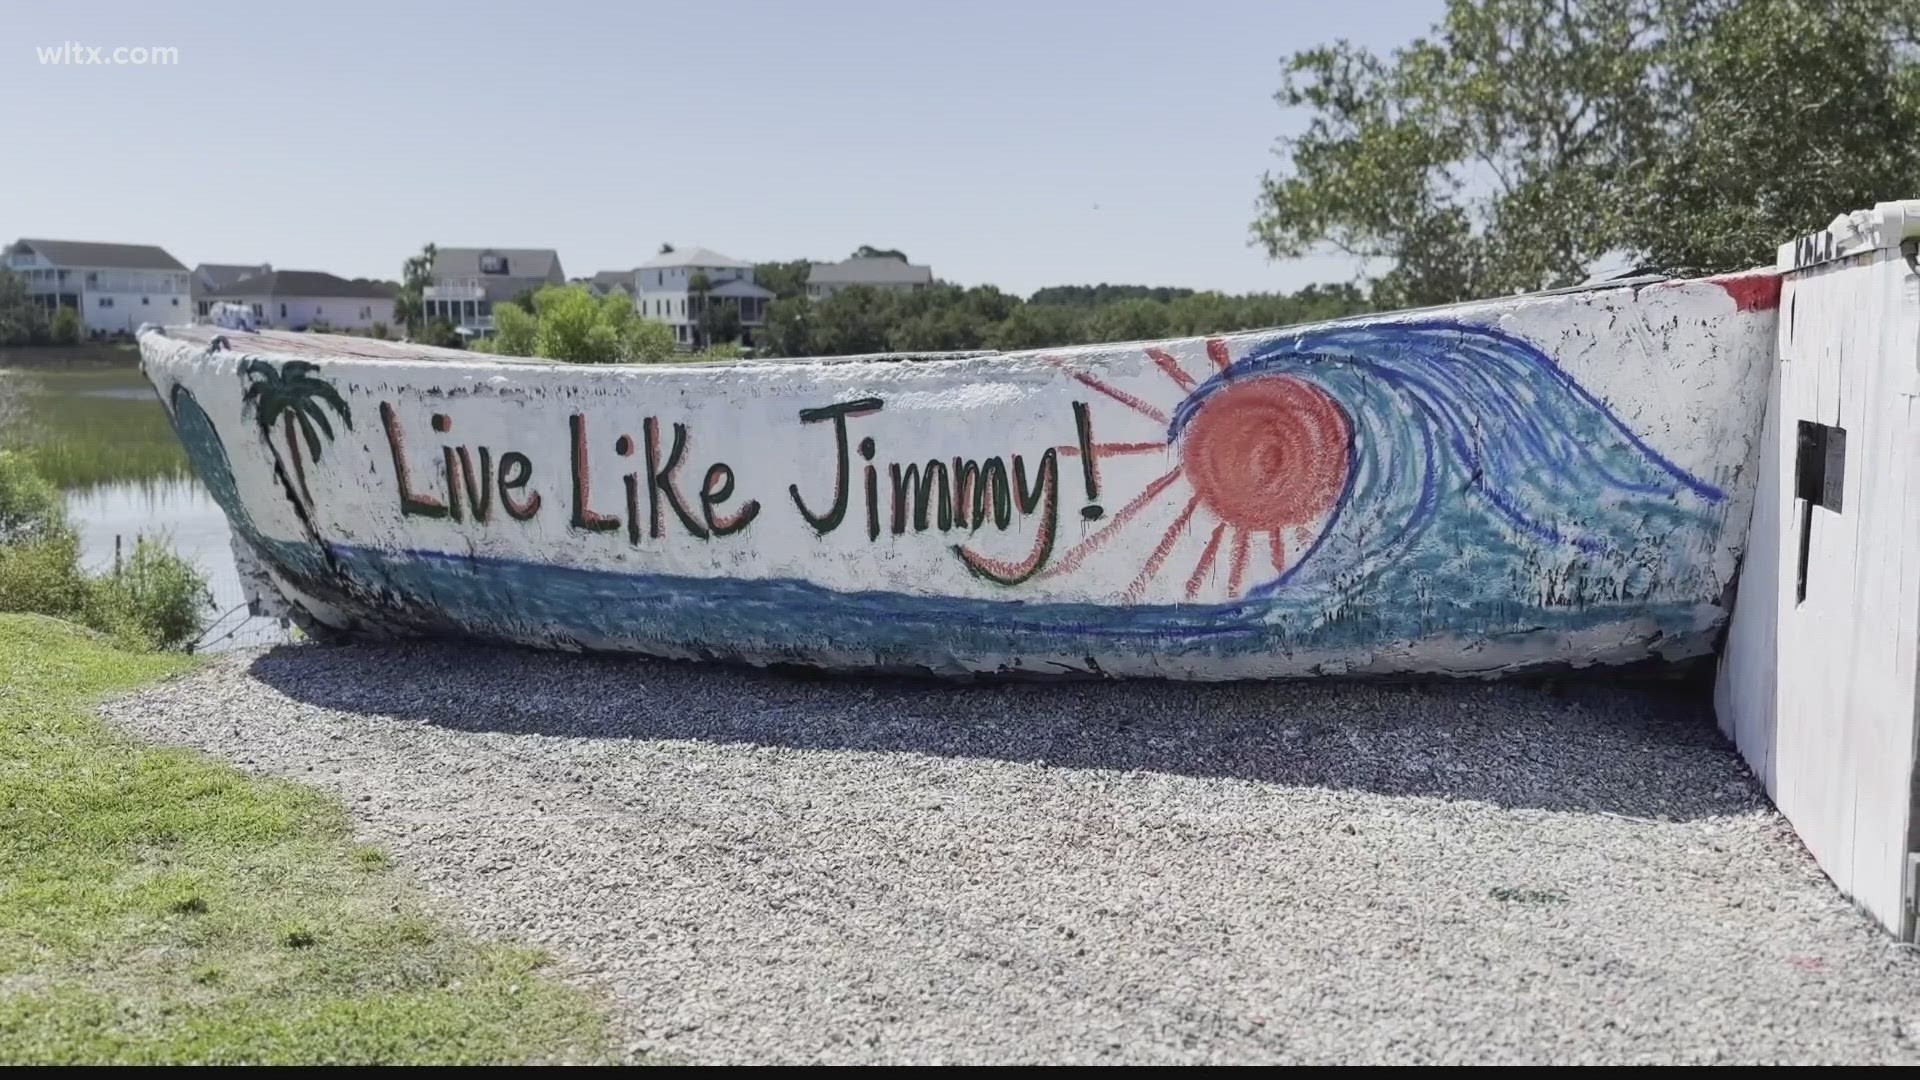 Fans around the country are continuing to pay tribute to Jimmy Buffet following his death, including in Charleston, SC.